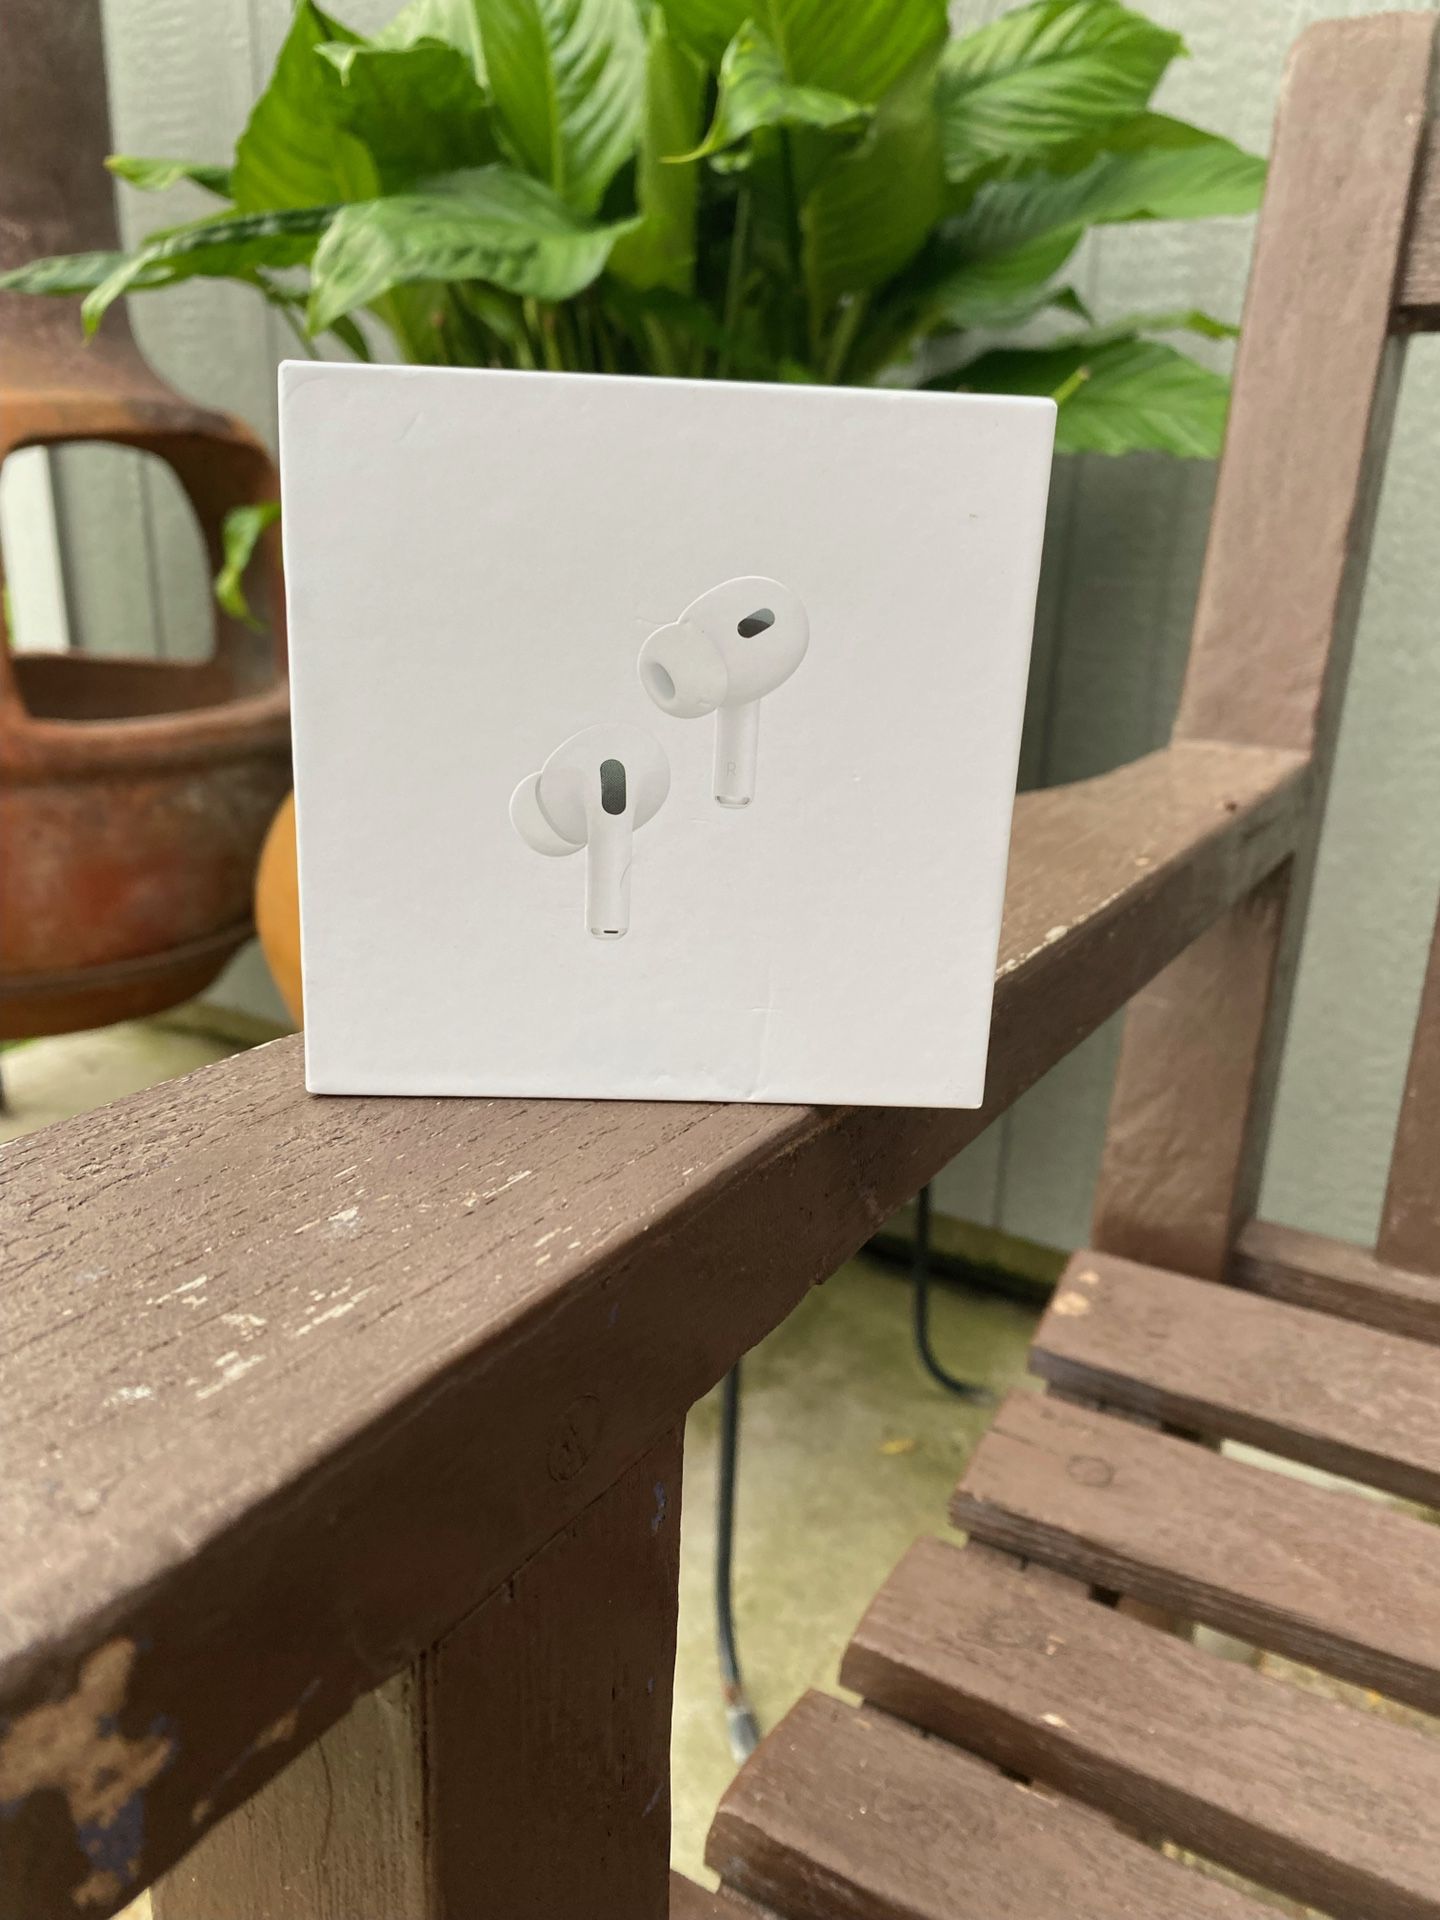 AirPods Pros 2